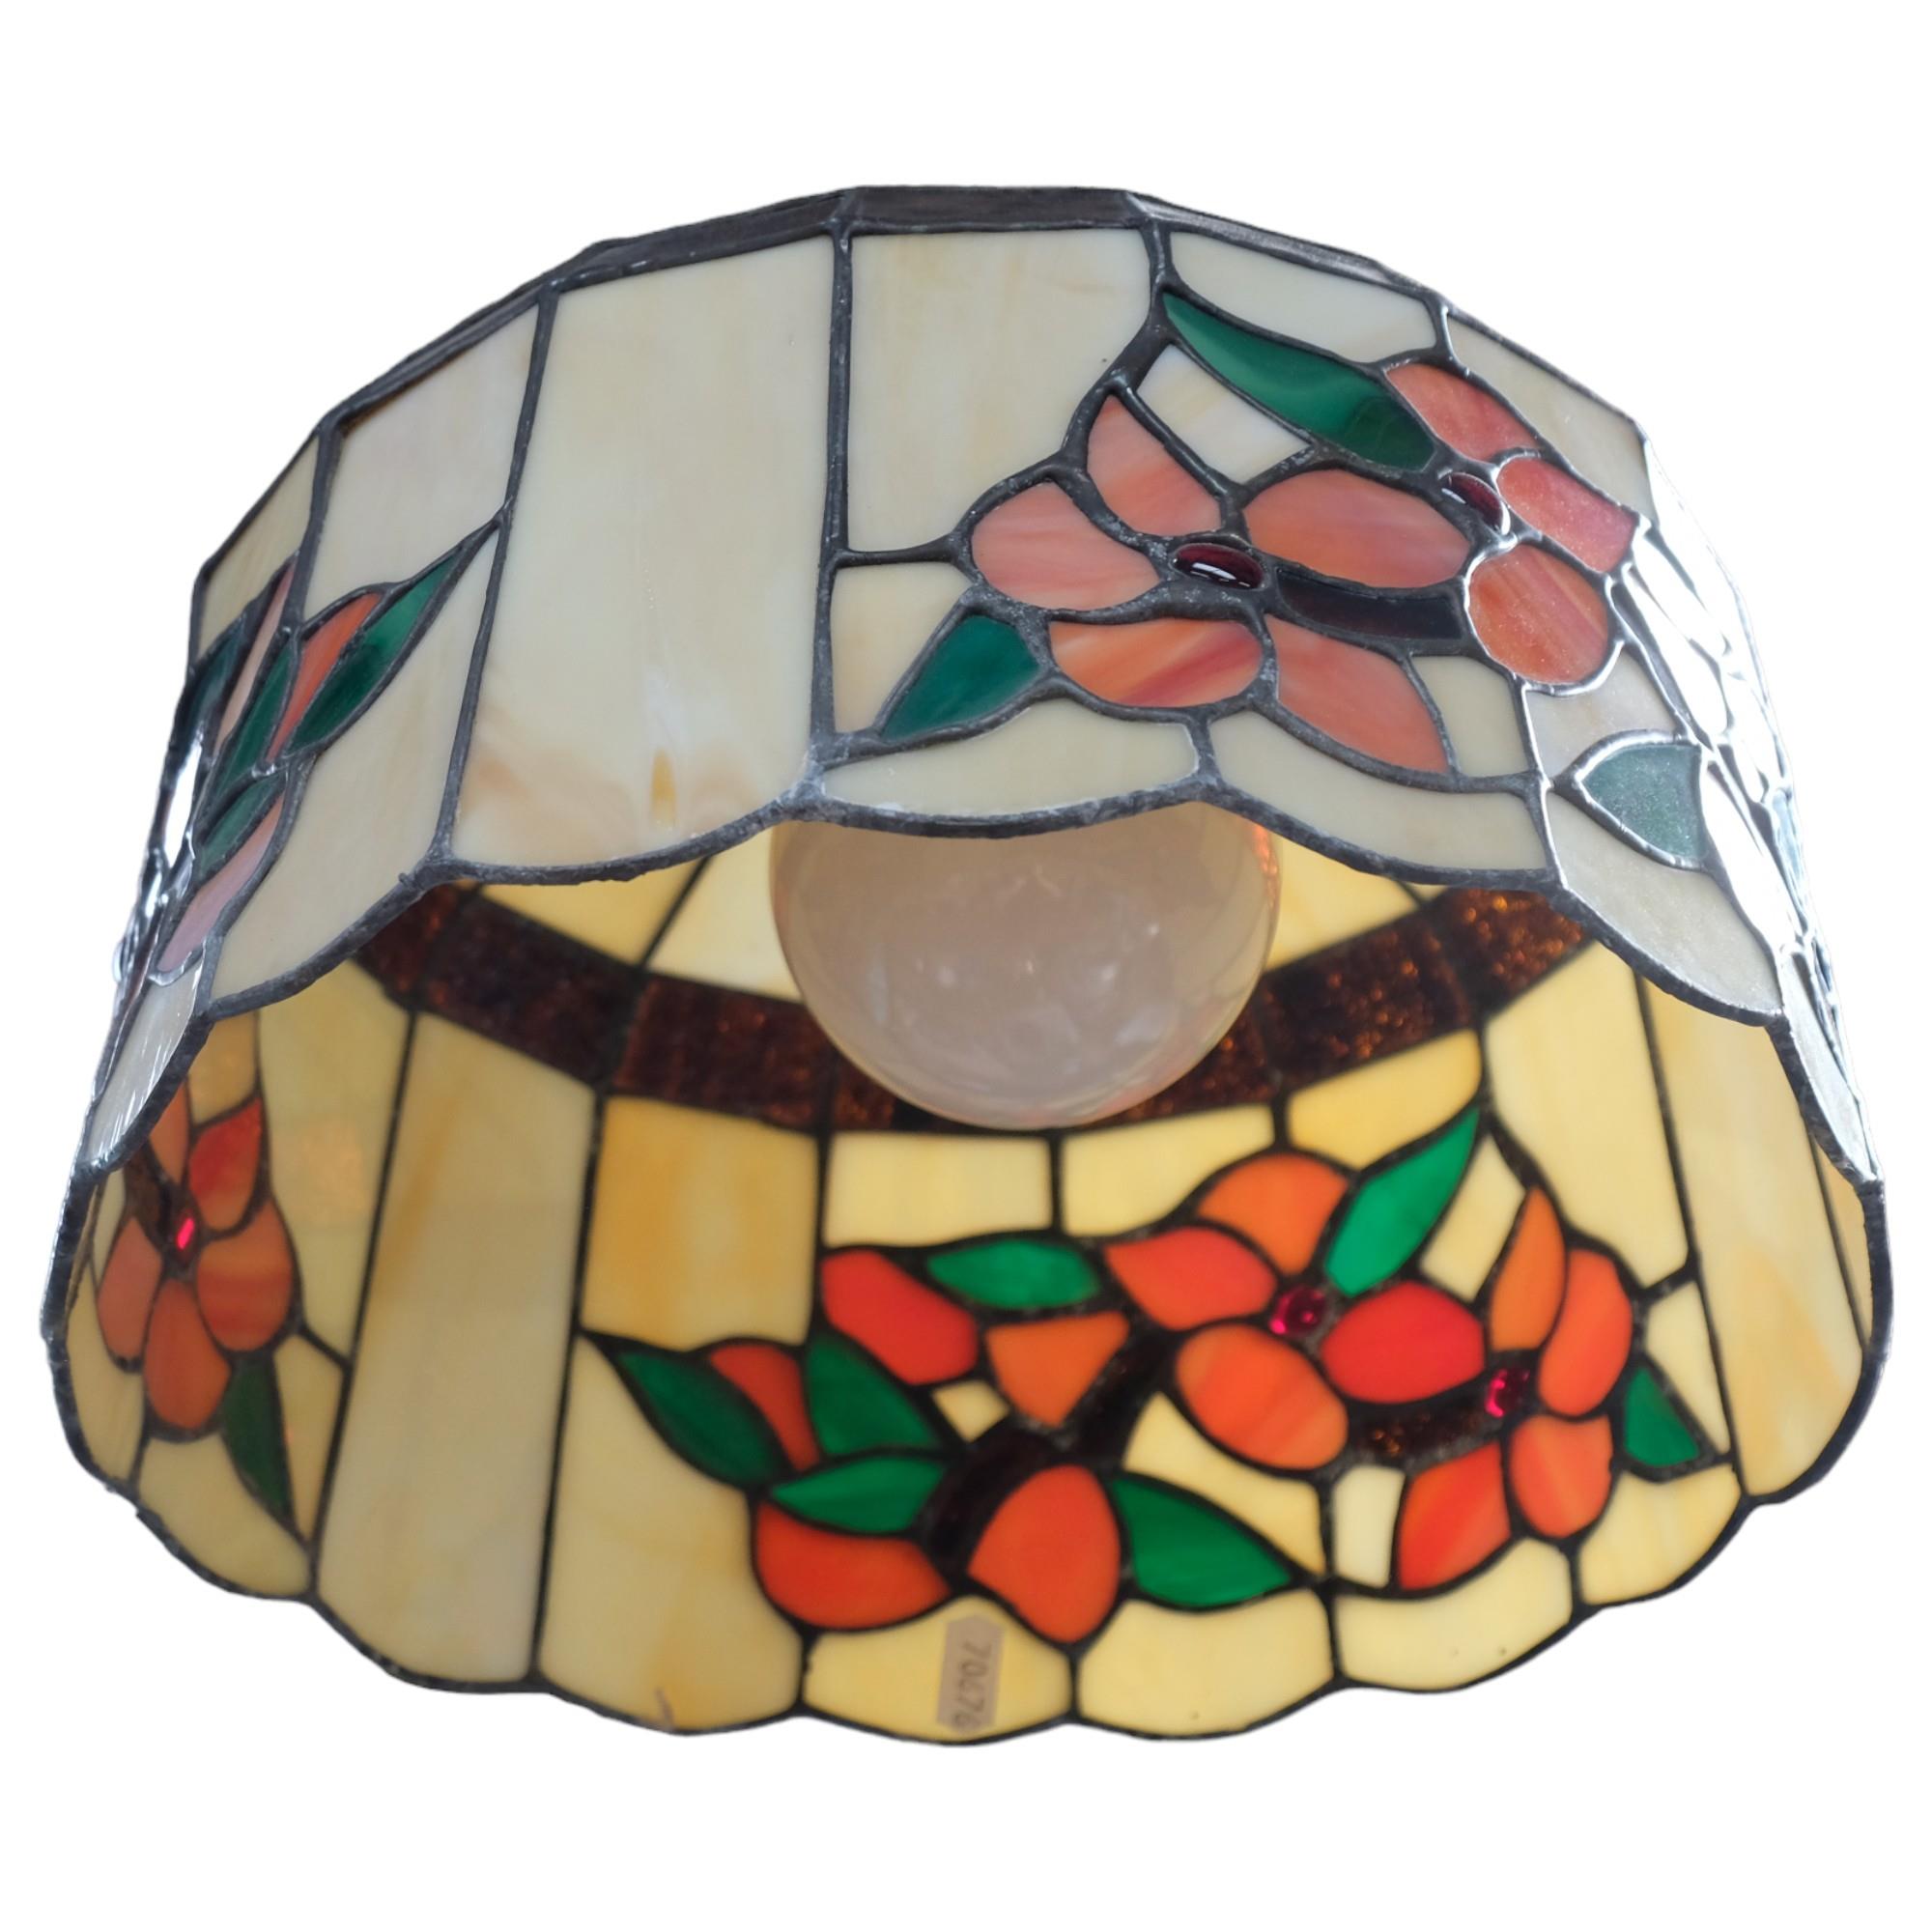 A Tiffany style leadlight ceiling light shade, with floral design, 32cm diameter - Image 2 of 2